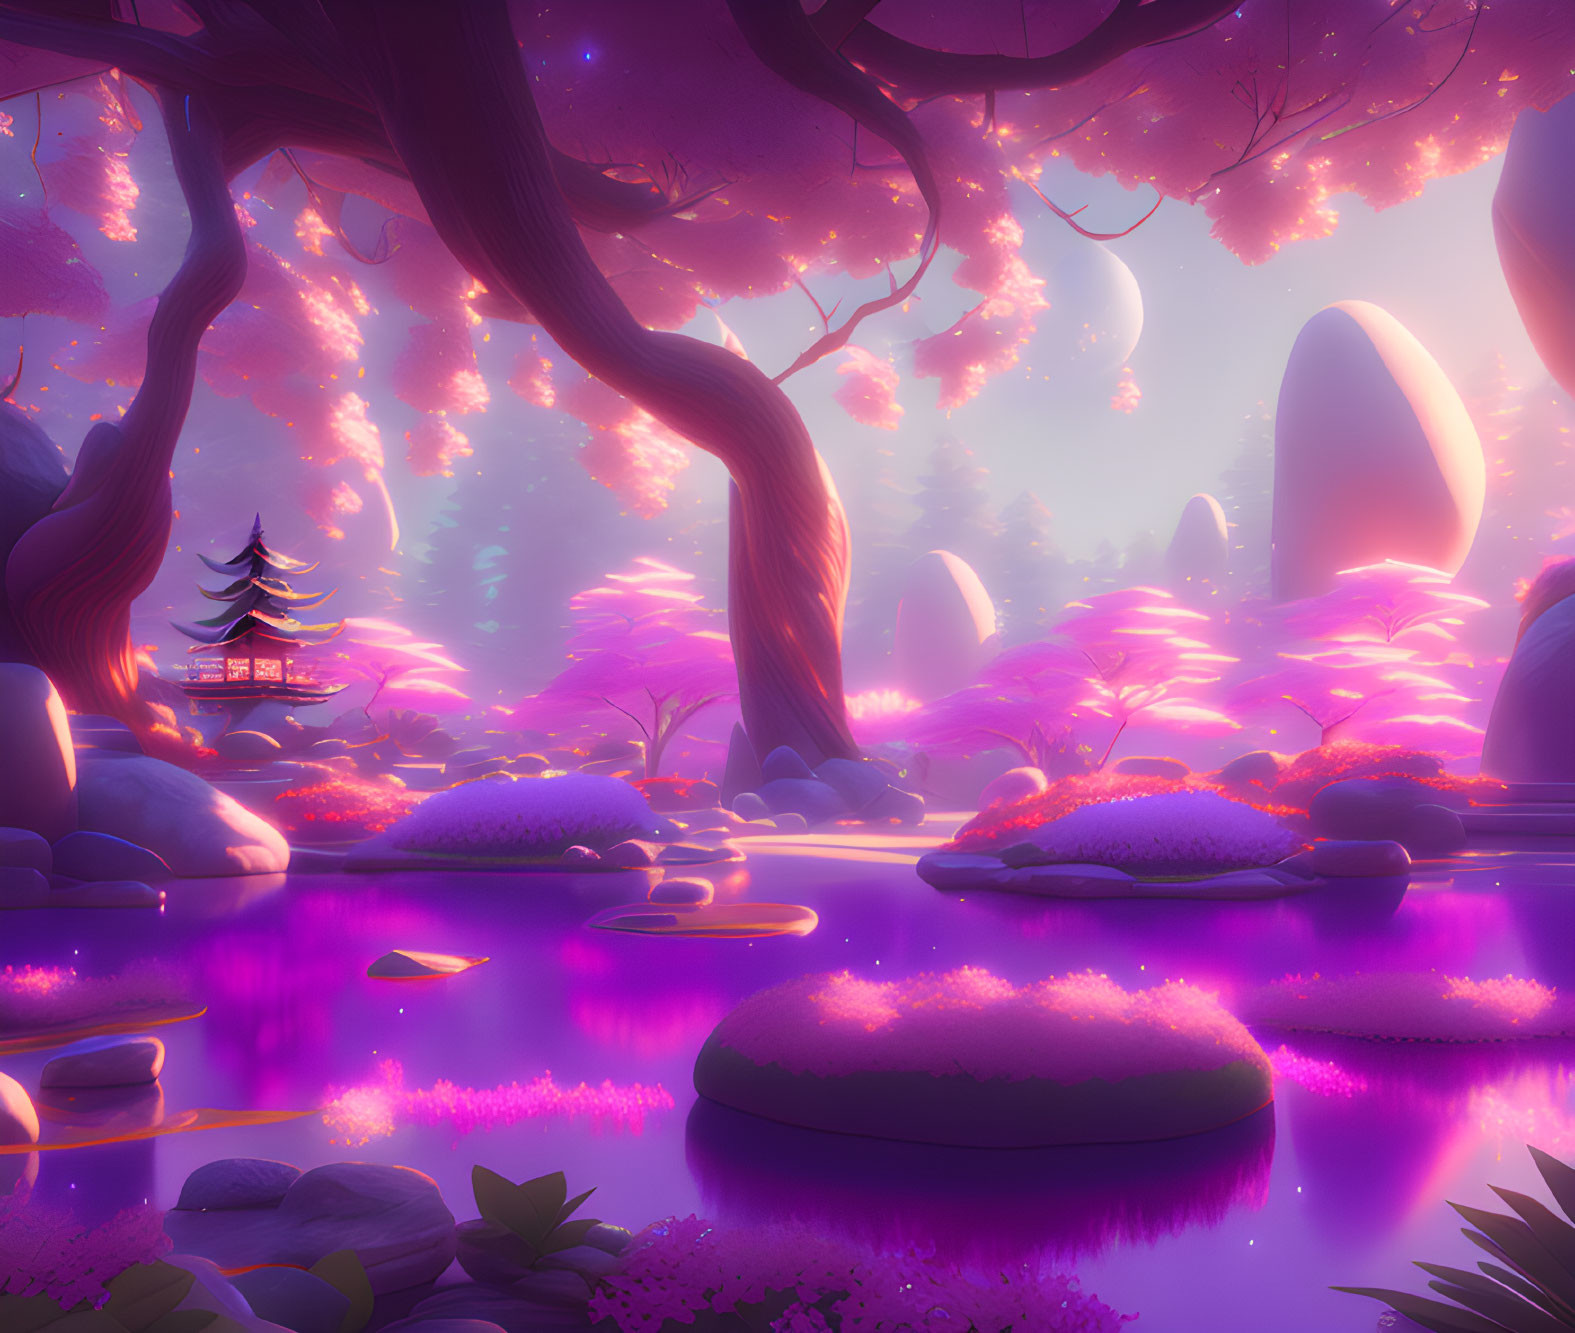 Fantasy landscape with purple and pink hues, serene lake, pagoda, whimsical trees, and